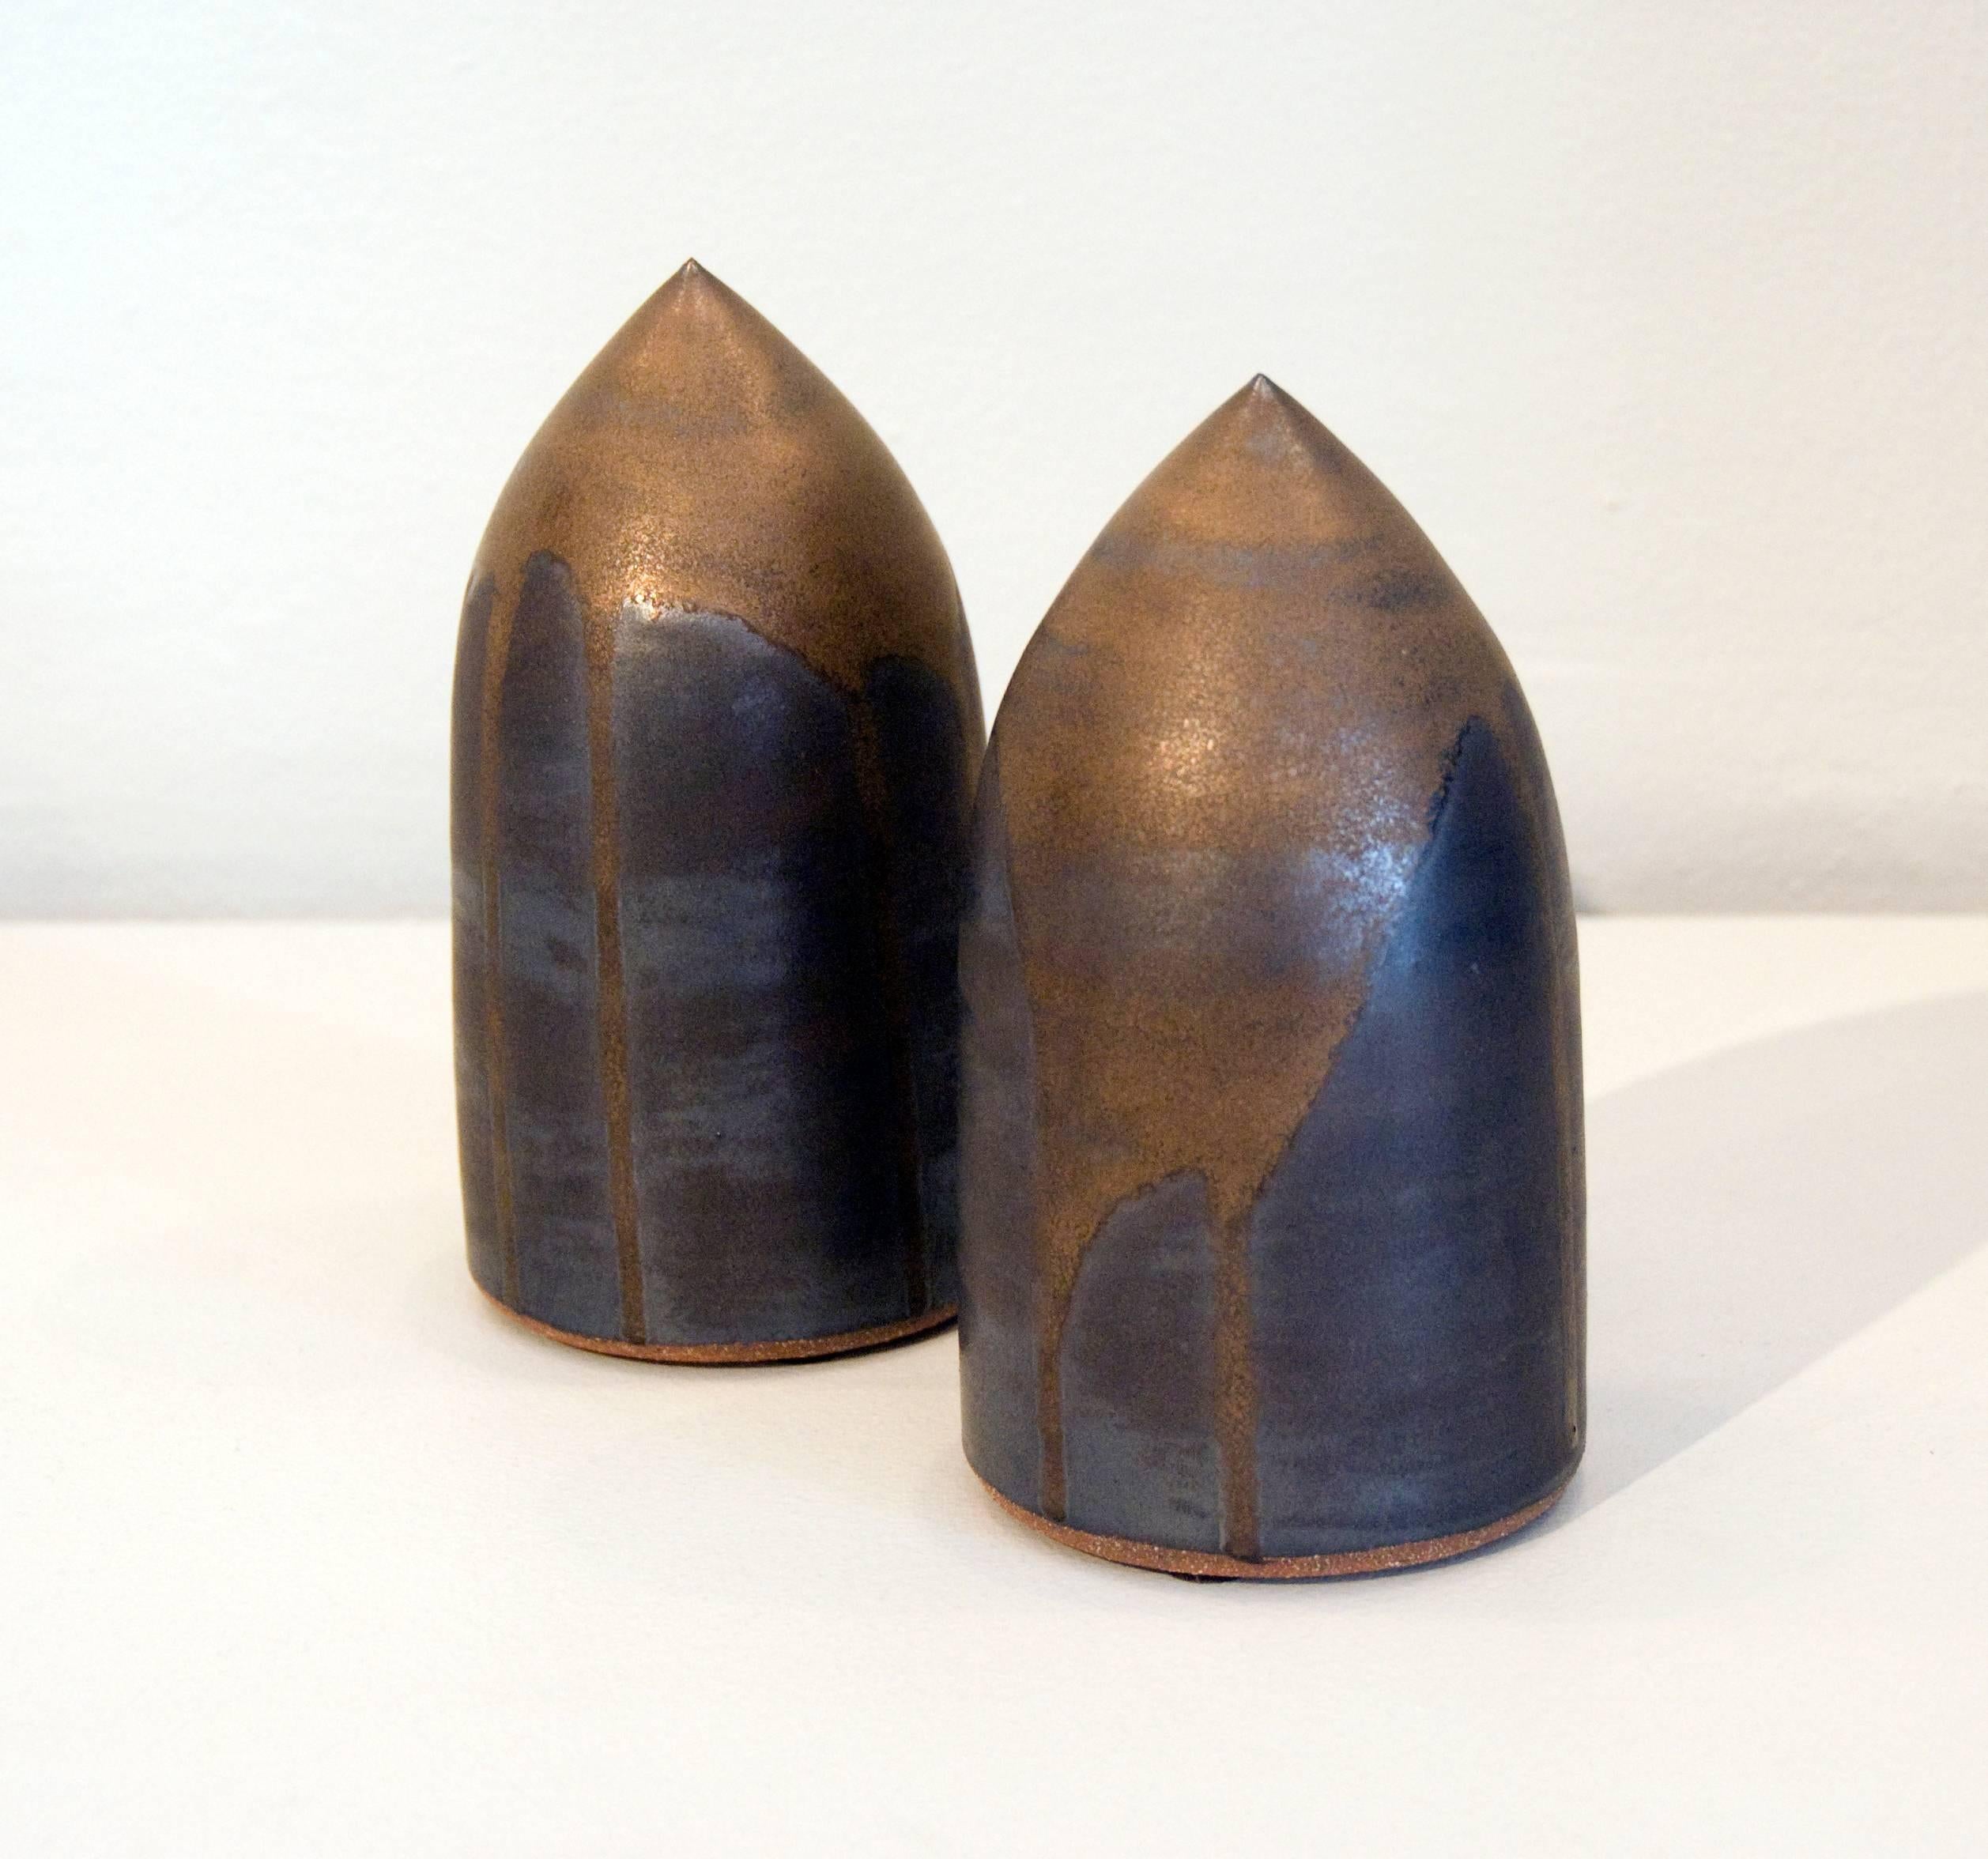 This gold and graphite sculpture made of high fire stoneware with glaze and gold over-pour from 2011 is the work of sculptor James Salaiz.

James Salaiz is a sculptor and ceramicist based in New York City. His first experience with clay was as a